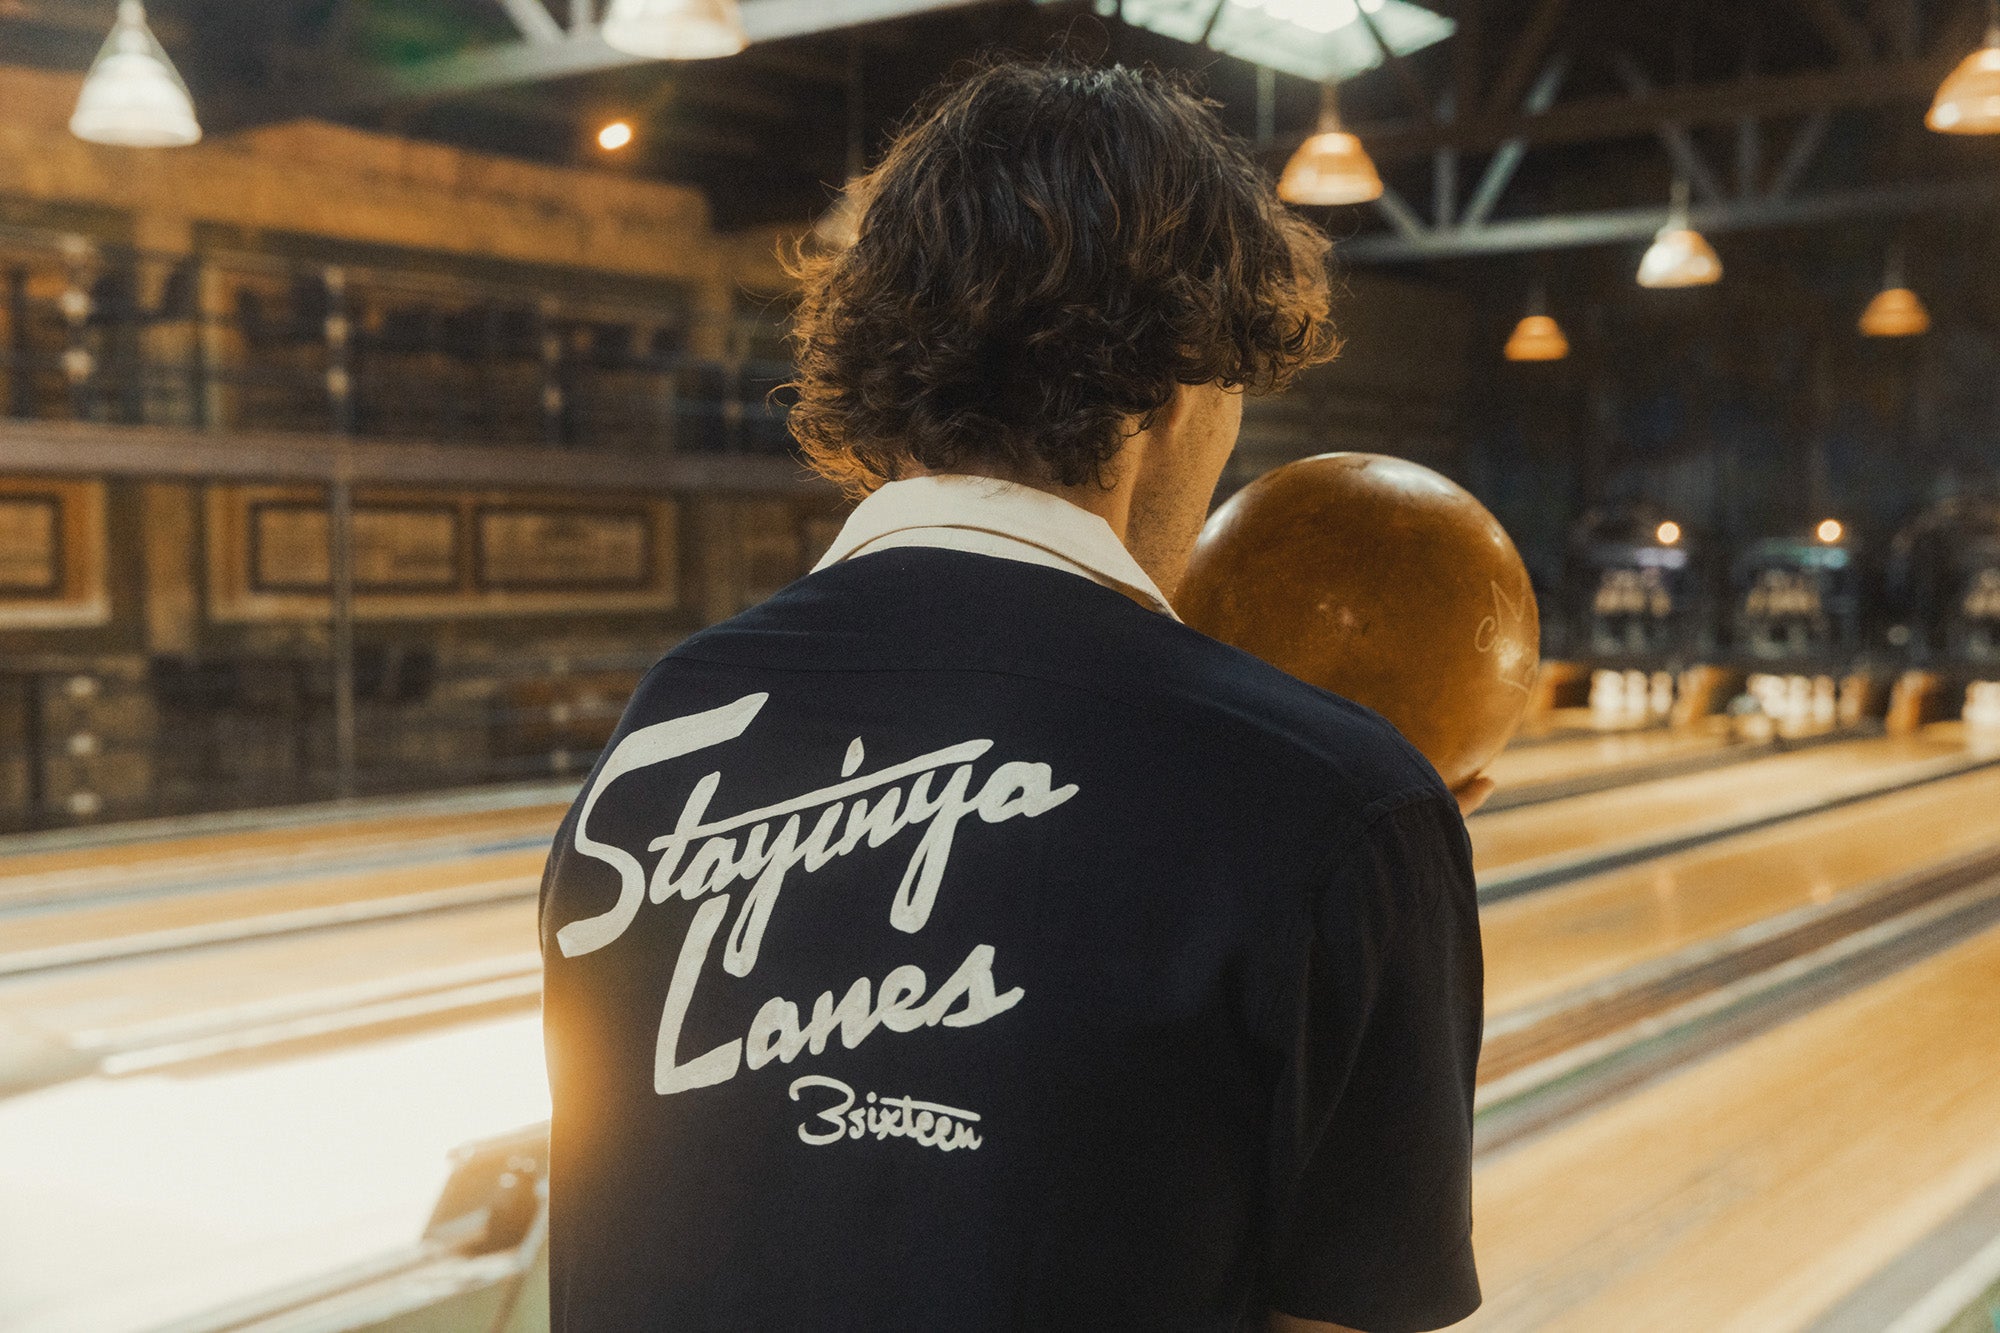 A man in a navy shirt with "Stayinya Lanes" embroidered on the back.